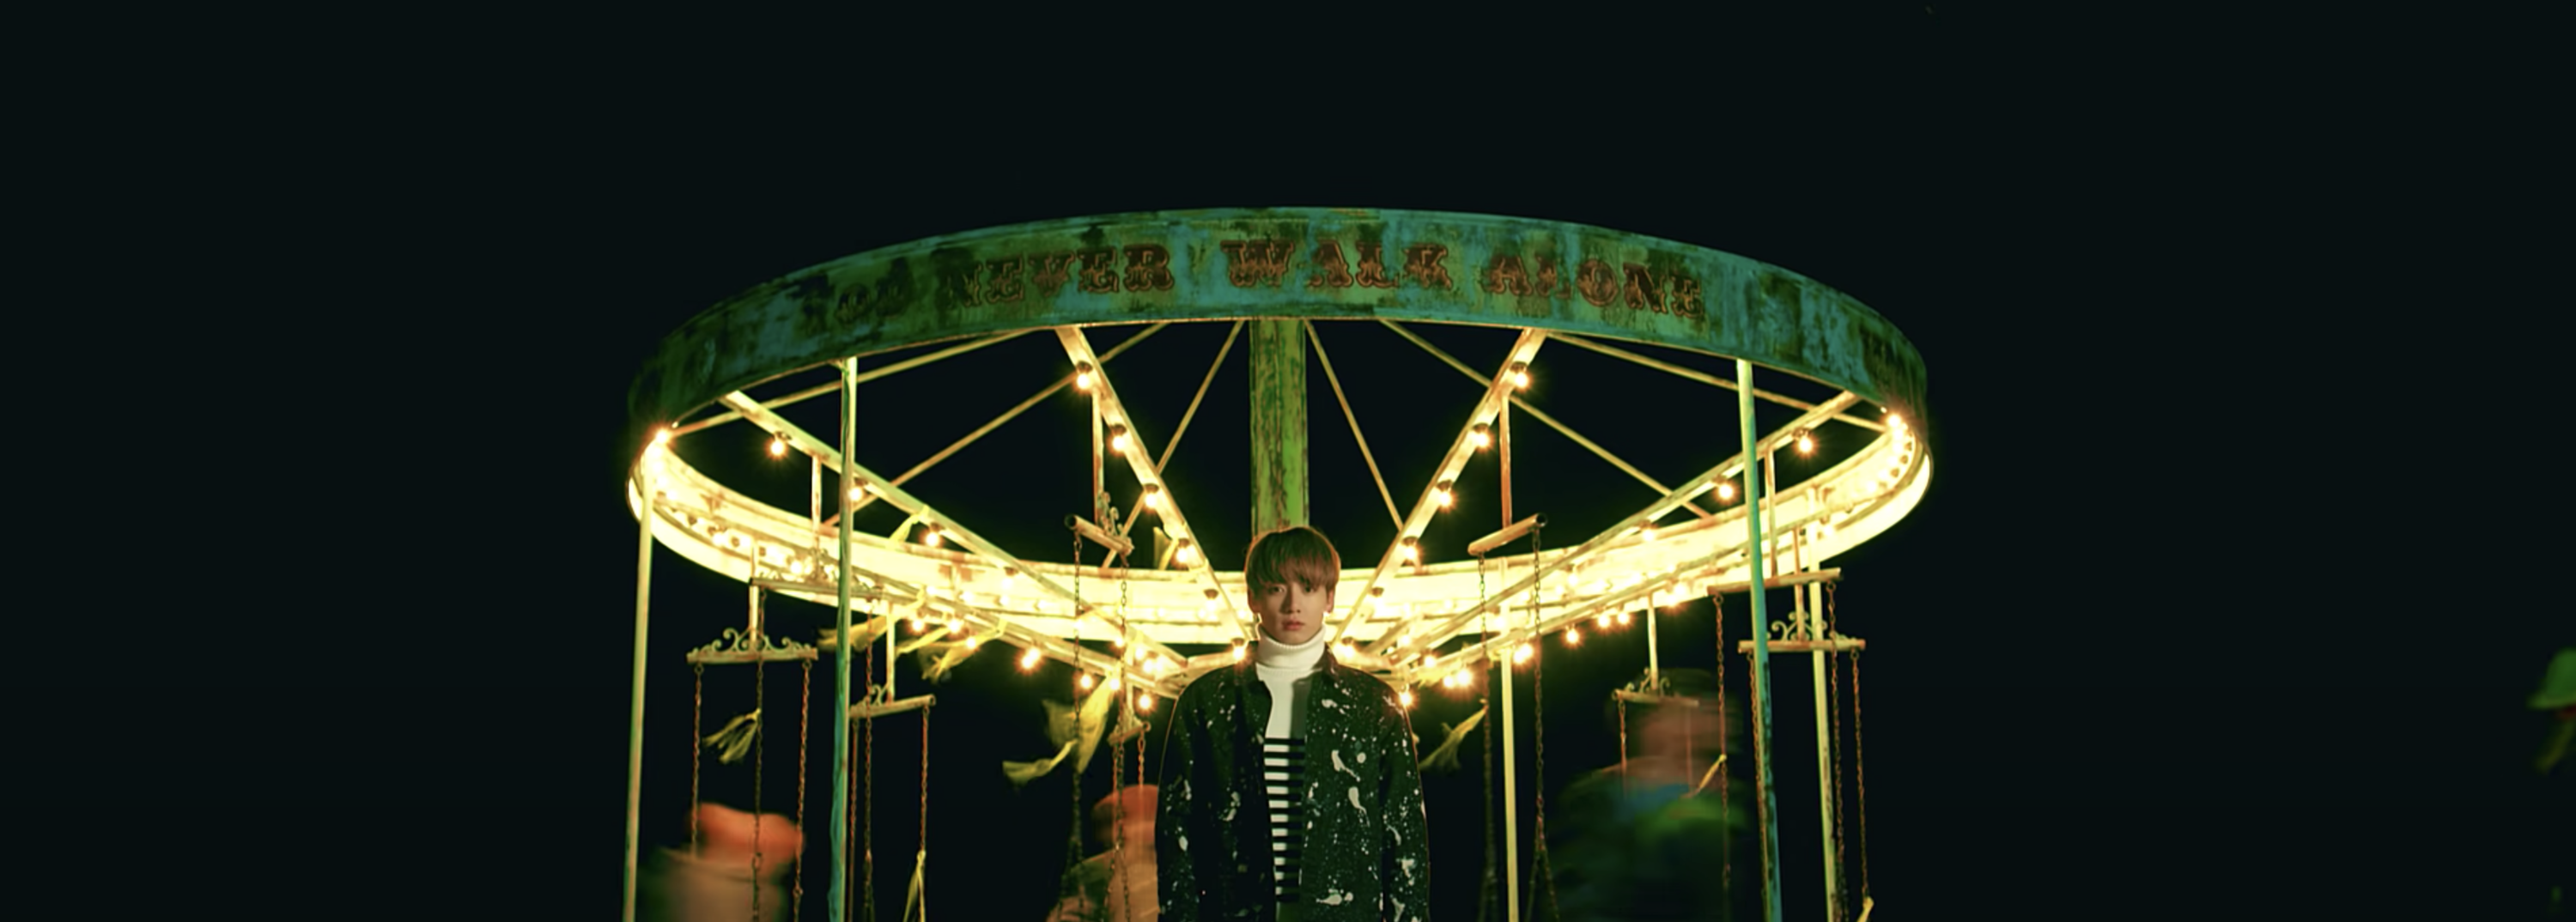 A still from a music video shows a carousel with the words &quot;you never walk alone&quot; on it